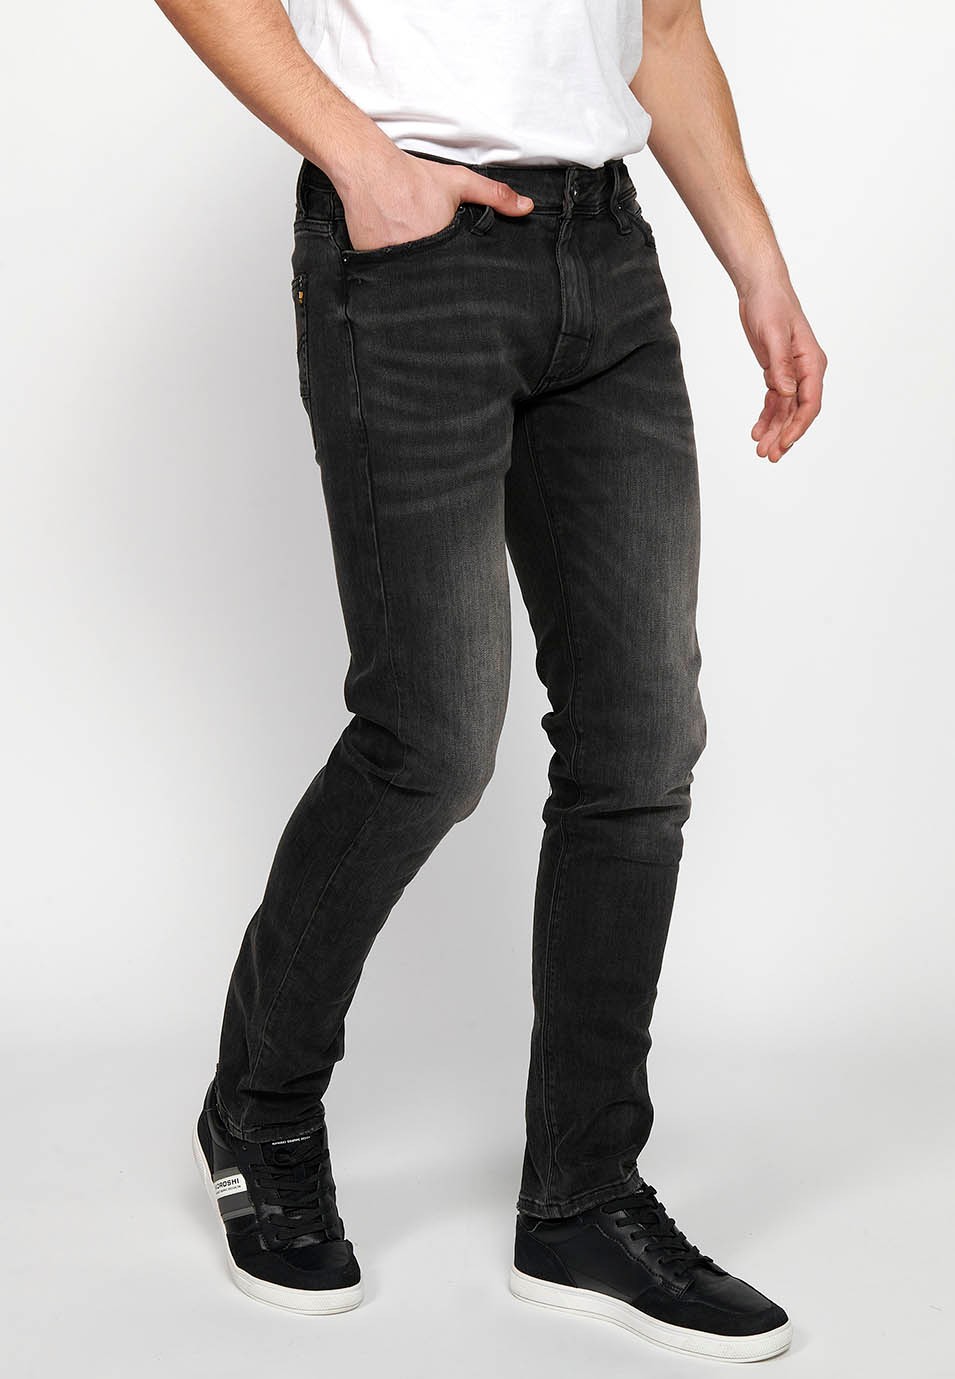 Regular fit long straight jeans with zipper and button front closure in Black Denim for Men 1